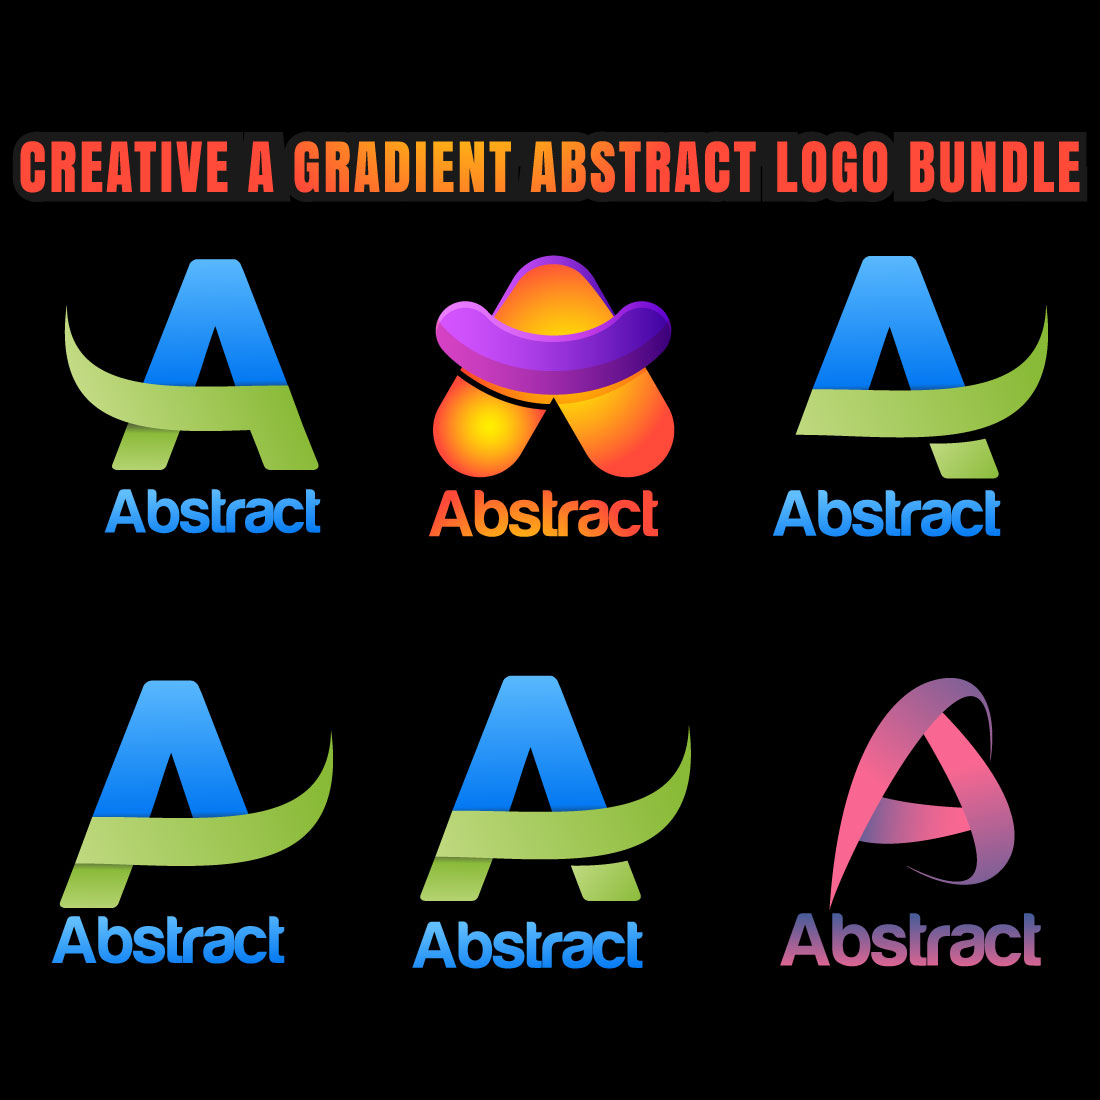 9 Creative A Gradient Abstract Logo Bundle preview image.